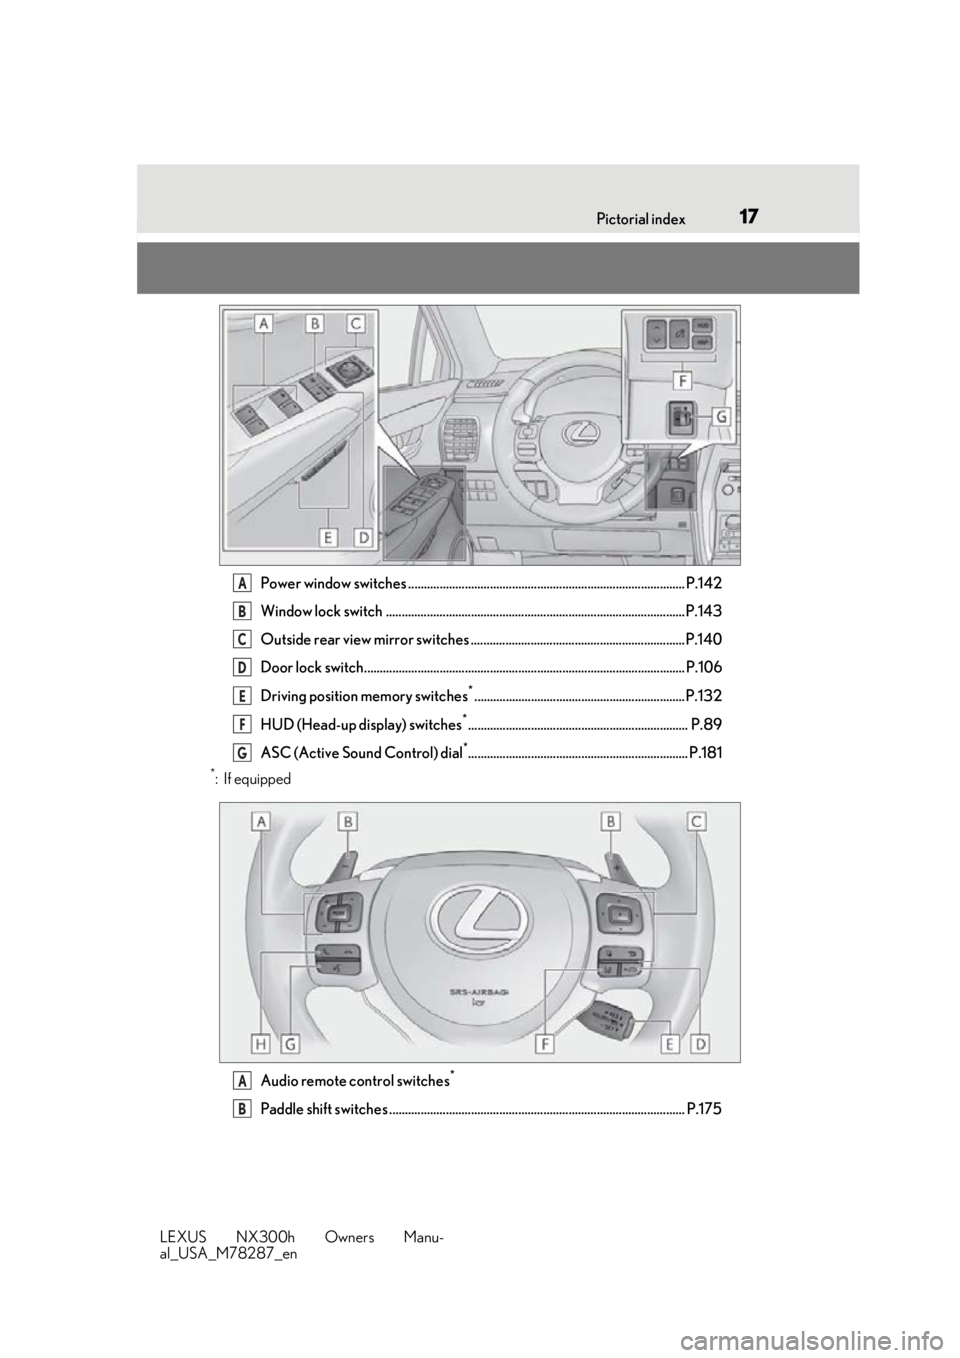 LEXUS NX300H 2019  Owners Manual 17Pictorial index
LEXUS NX300h Owners Manu-
al_USA_M78287_en
Power window switches ........................................................................................ P.142
Window lock switch ...